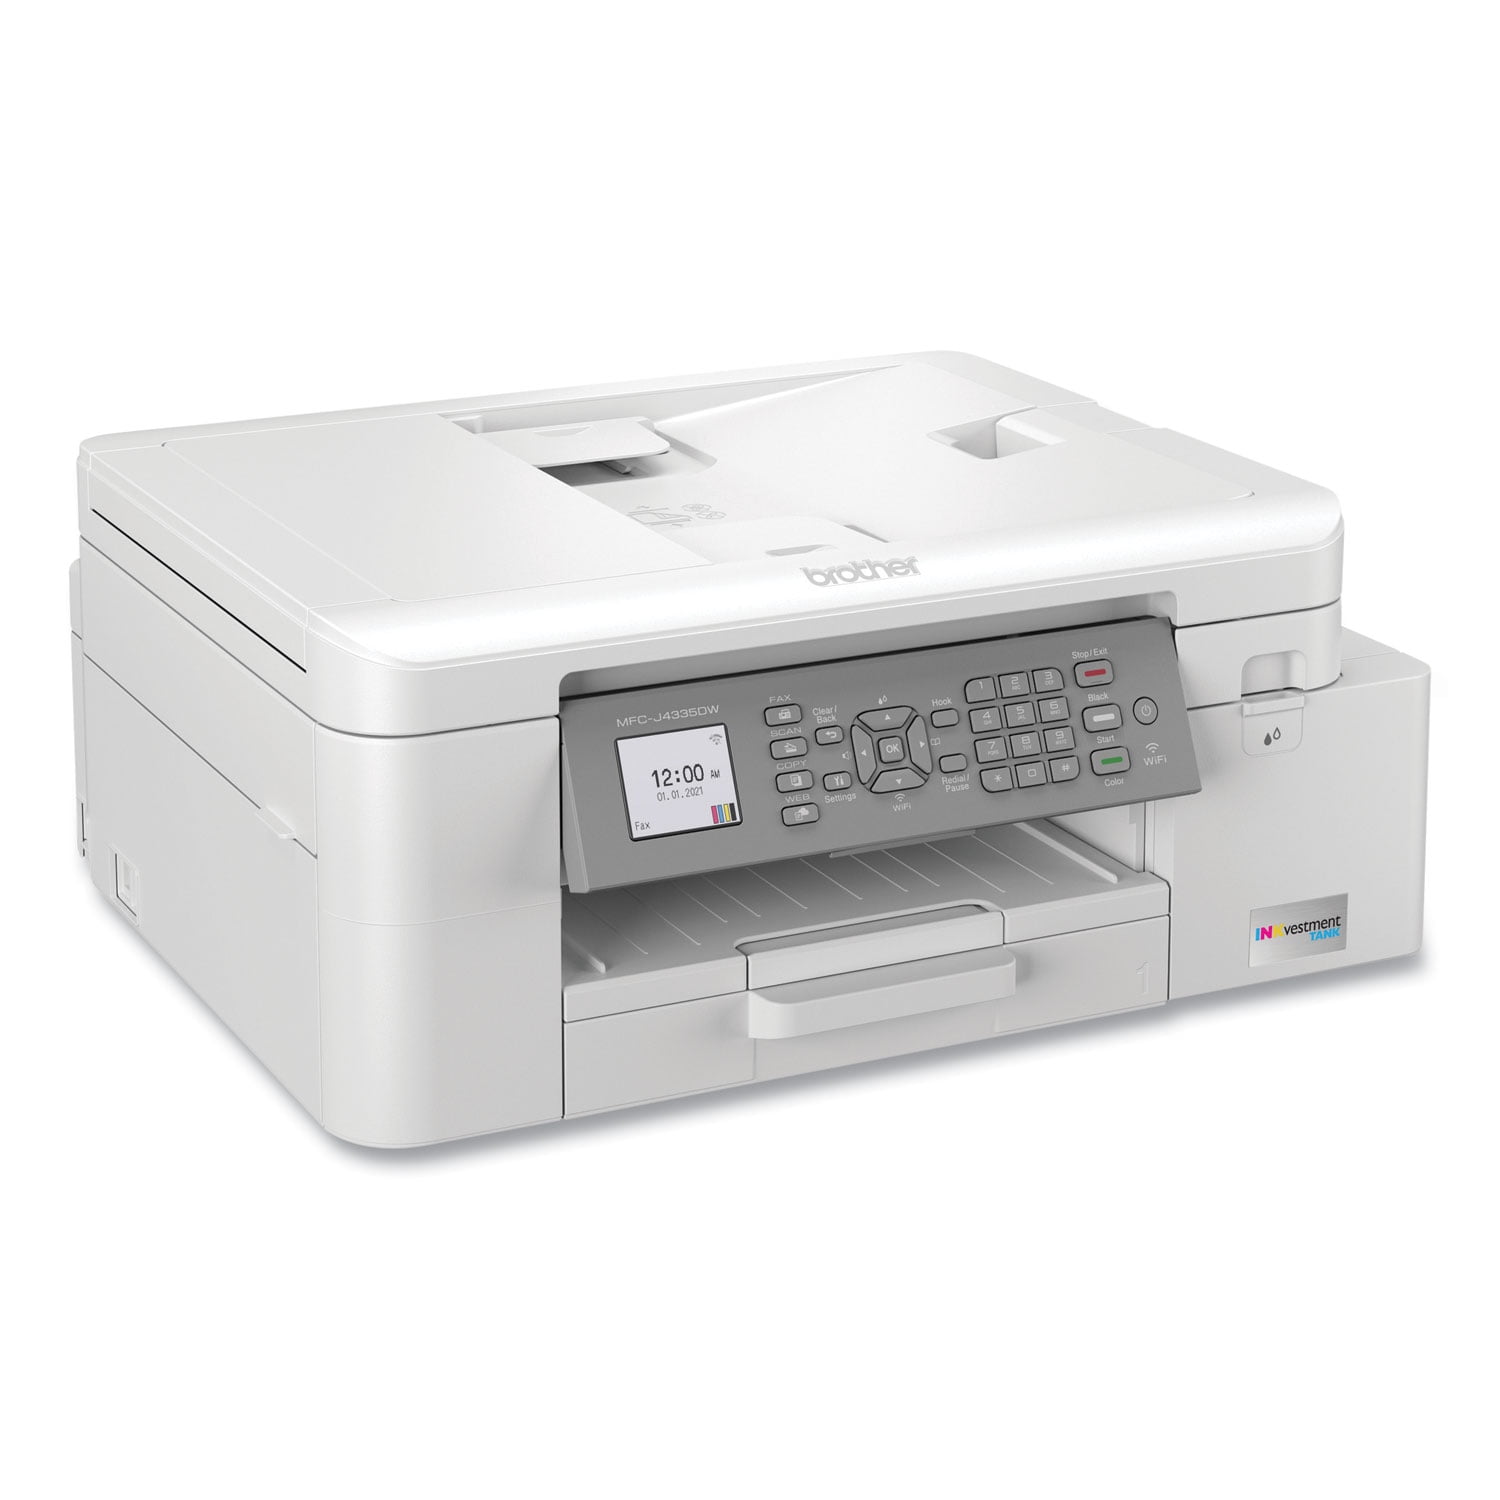 Knorrig Induceren Minachting Brother MFC-J4335DW All-in-One Color Inkjet Printer, Copy/Fax/Print/Scan -  Walmart.com